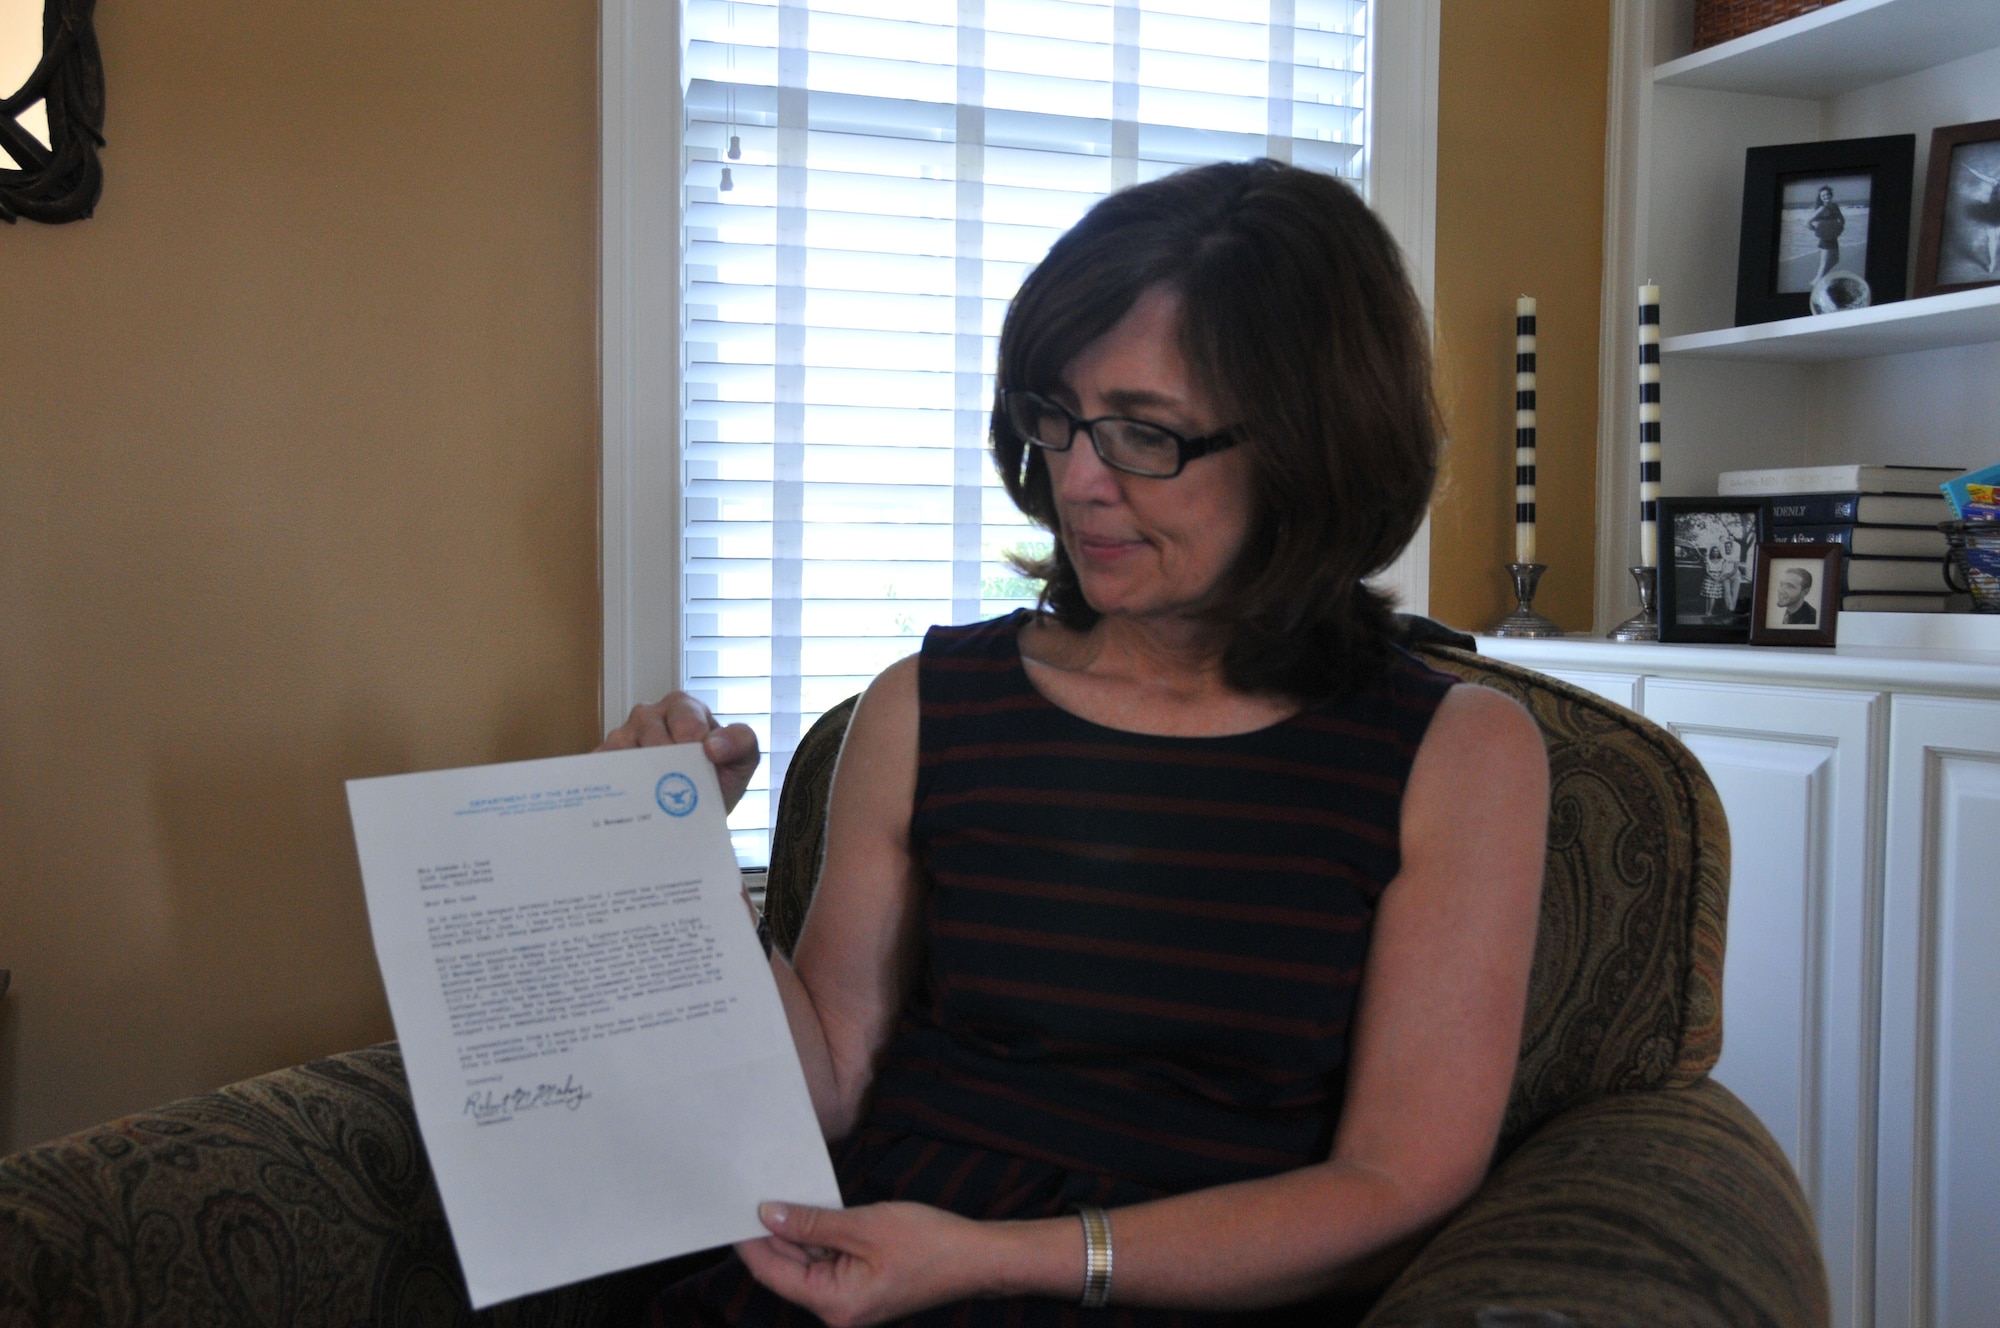 Maureen Kozak, the wife of Col. Raymond A. Kozak, the 512th Airlift Wing commander at Dover Air Force Base, Del., holds the formal memorandum dated Nov. 11, 1967, which notified Maureen’s mother of the circumstances that led to the missing status of Lt. Col. Kelly Cook. Maureen’s father was initially listed as missing in action and later declared killed in action, body not recovered. (U.S. Air Force photo/Staff Sgt. Mercedes Crossland)